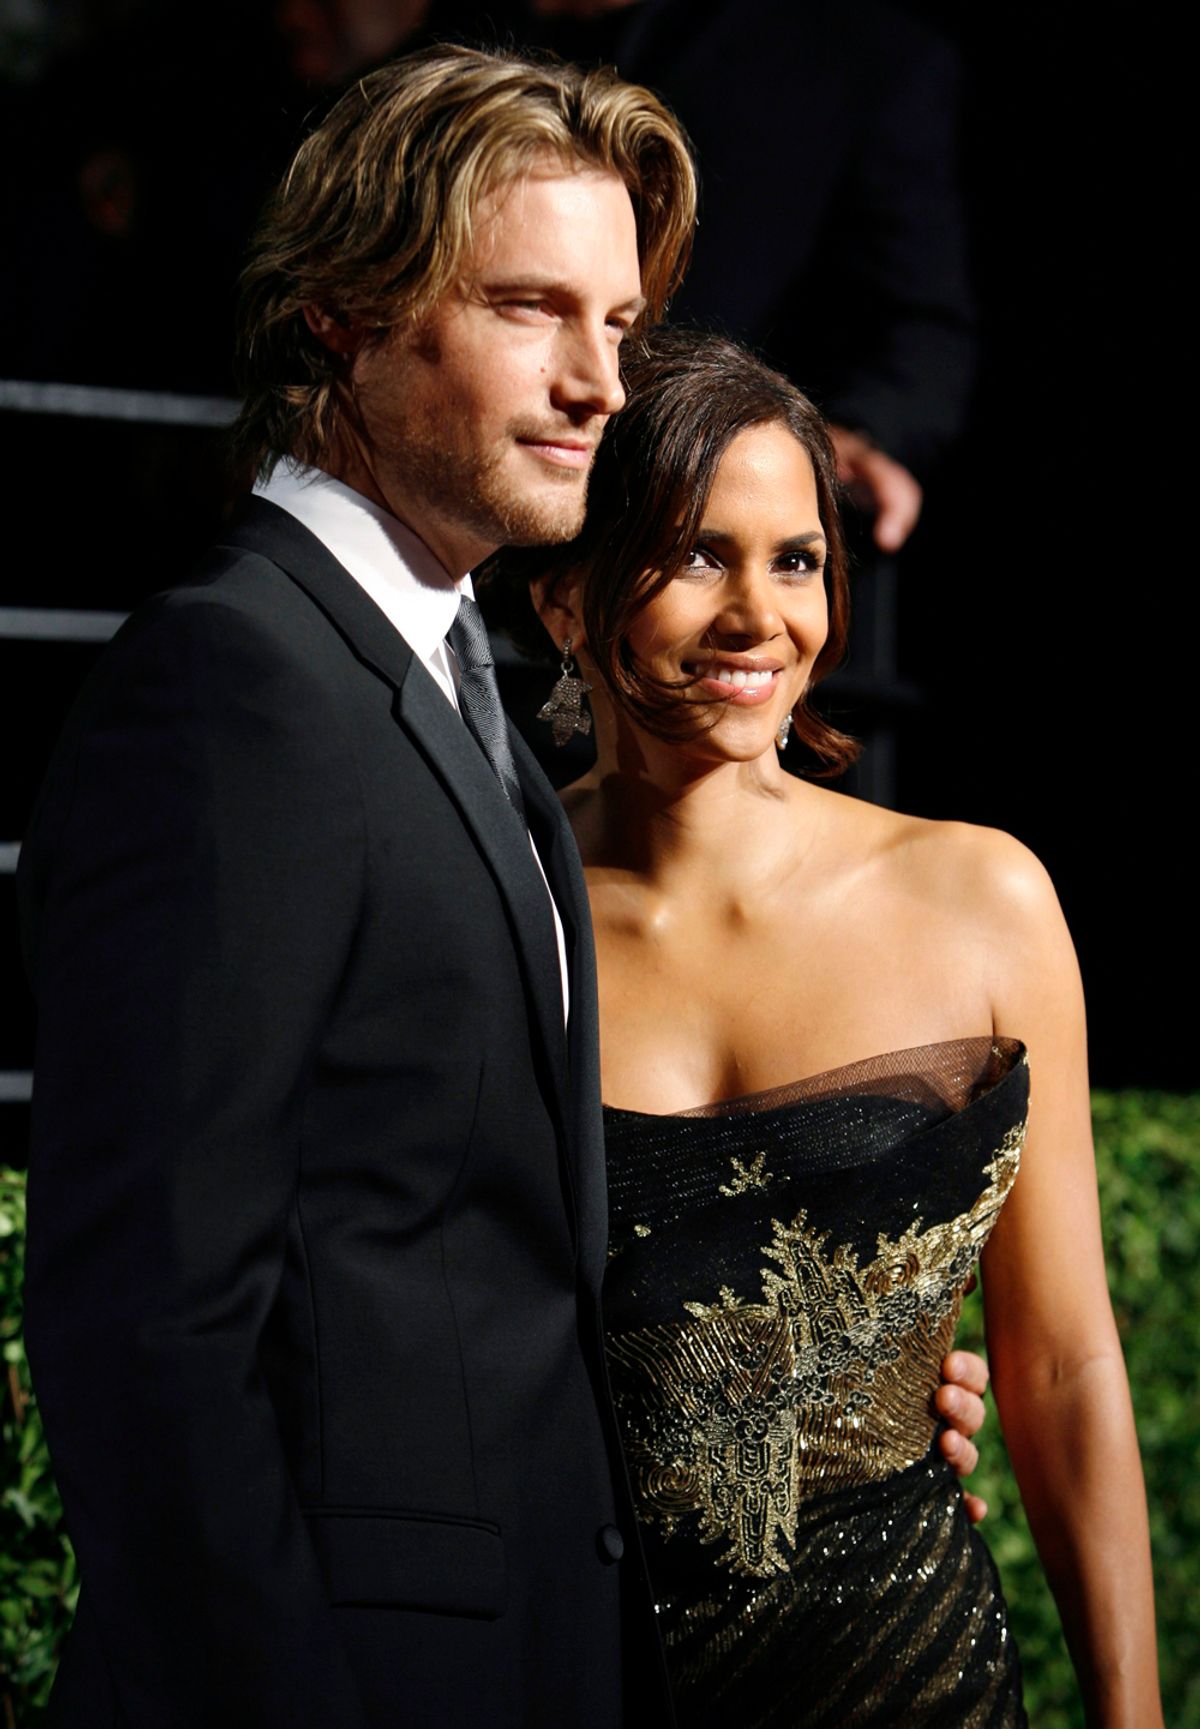 Actress Halle Berry and model Gabriel Aubry pose as they arrive at the 2009 Vanity Fair Oscar Party in West Hollywood, California February 22, 2009. REUTERS/Danny Moloshok  (UNITED STATES) (OSCARS-PARTY) (Â© Danny Moloshok / Reuters)